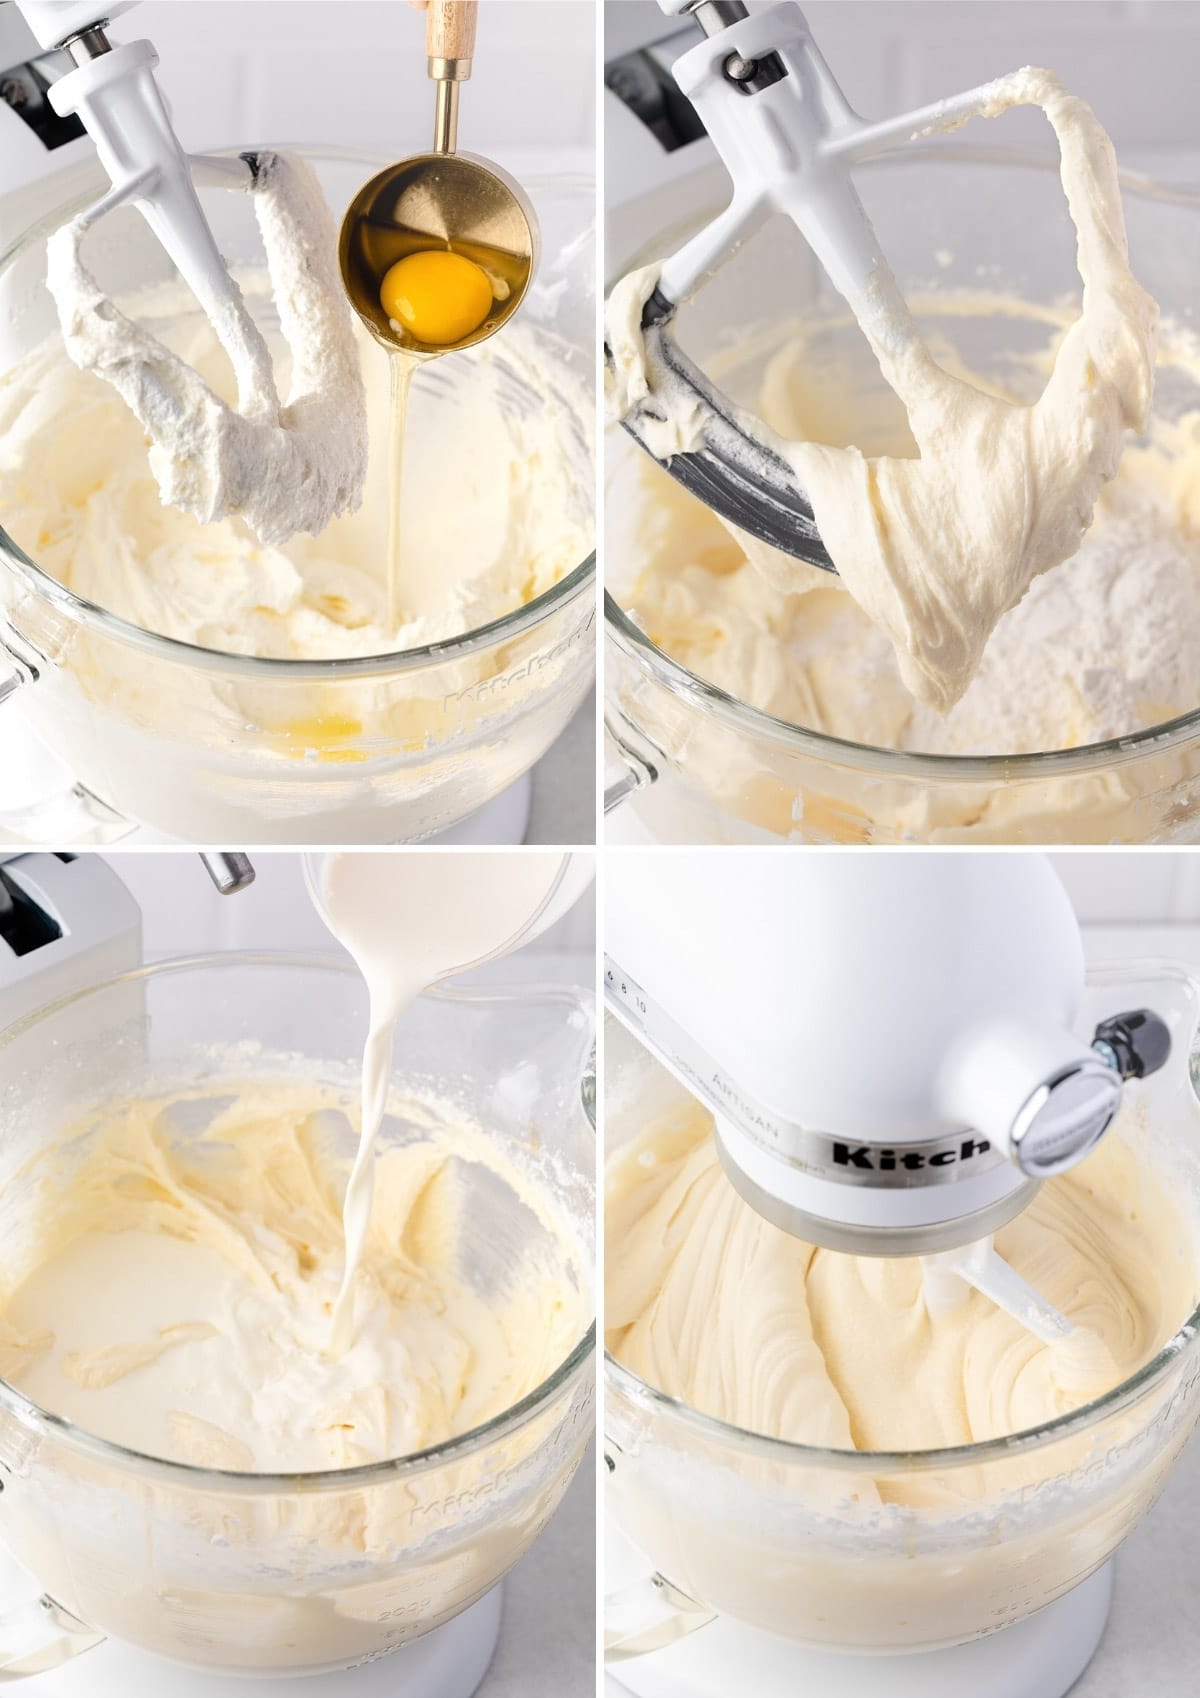 four photos showing the process of making vanilla pound cake in a stand mixer